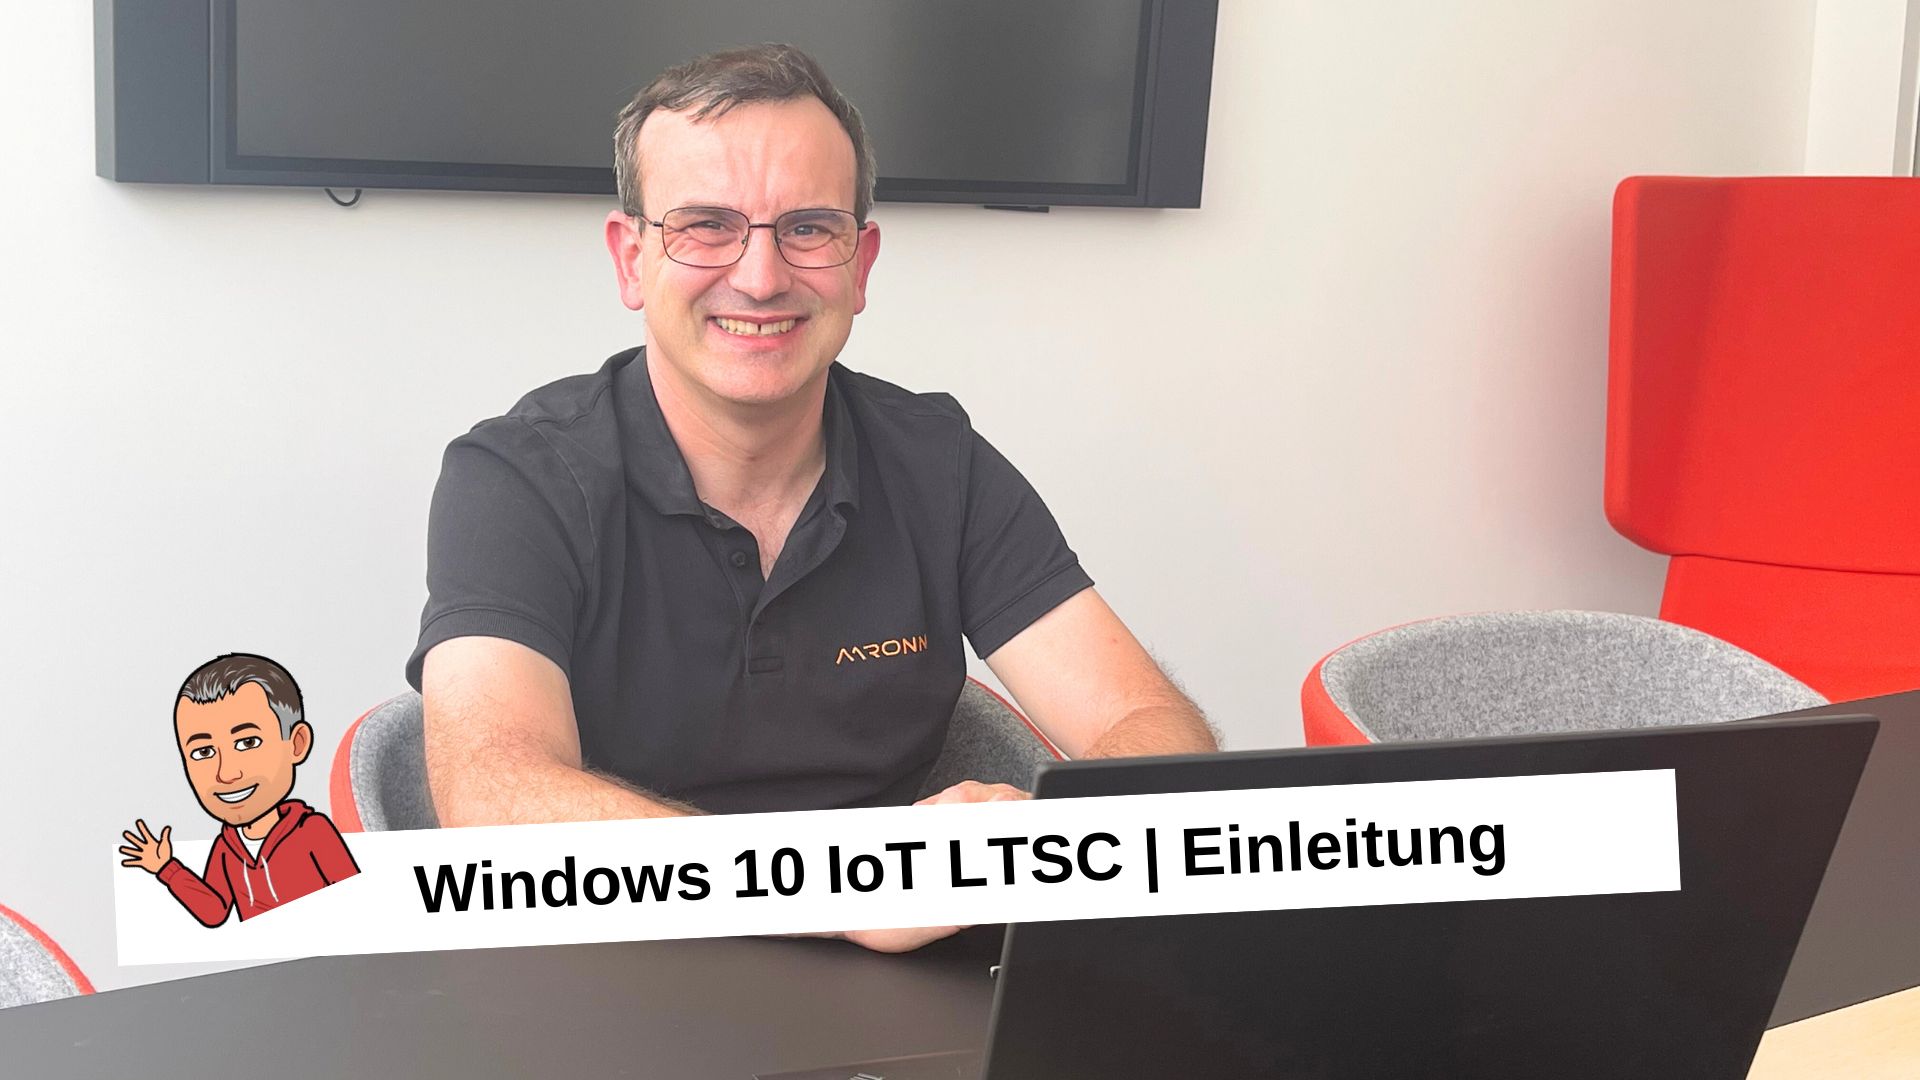 You are currently viewing Windows 10 IoT LTSC | Einleitung